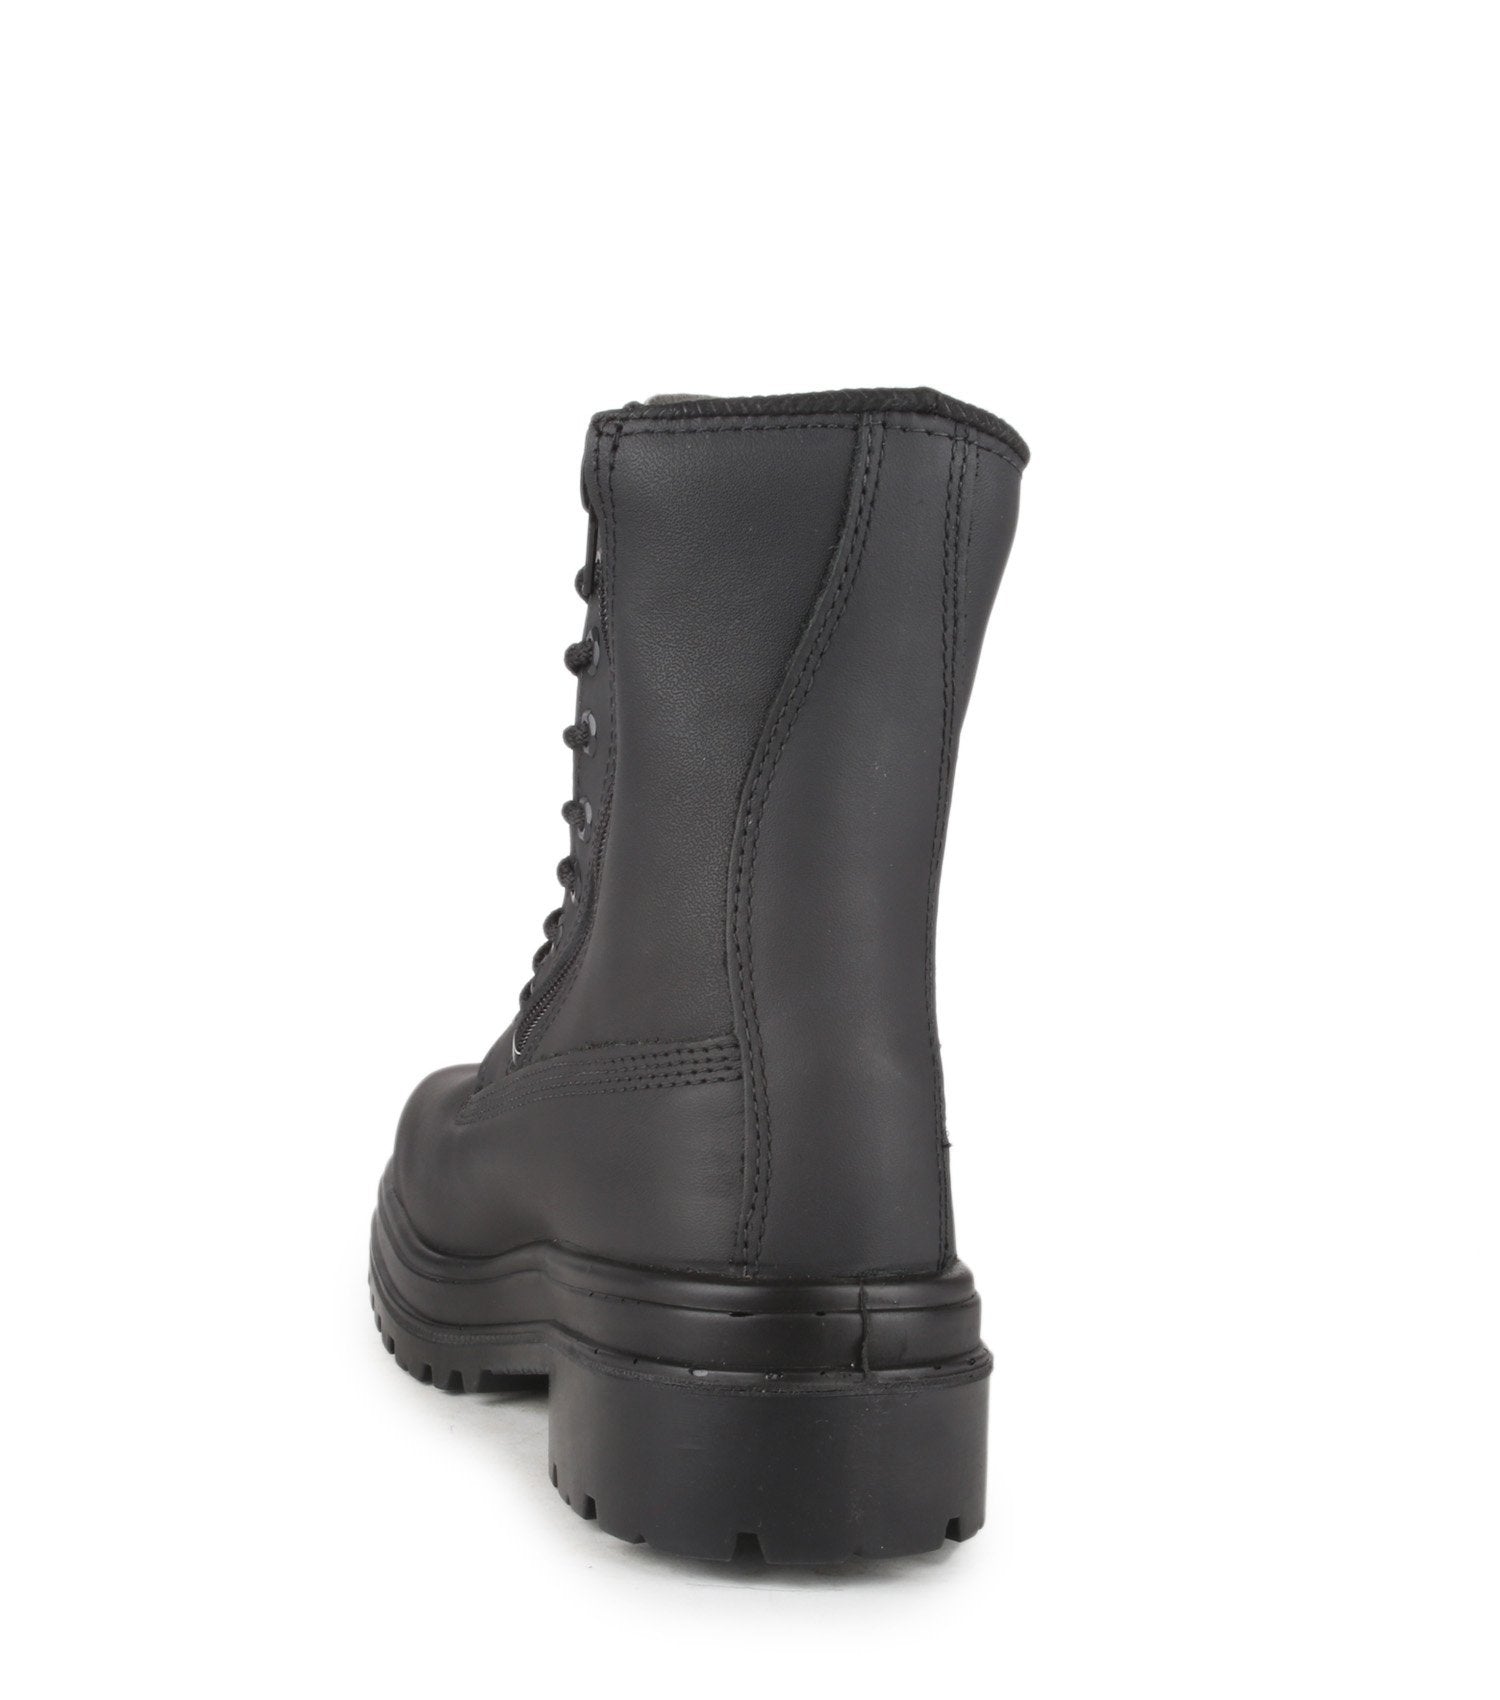 STC Blitz Side-Zip 8" Safety Boots | Black | Sizes 7 - 14 Work Boots - Cleanflow